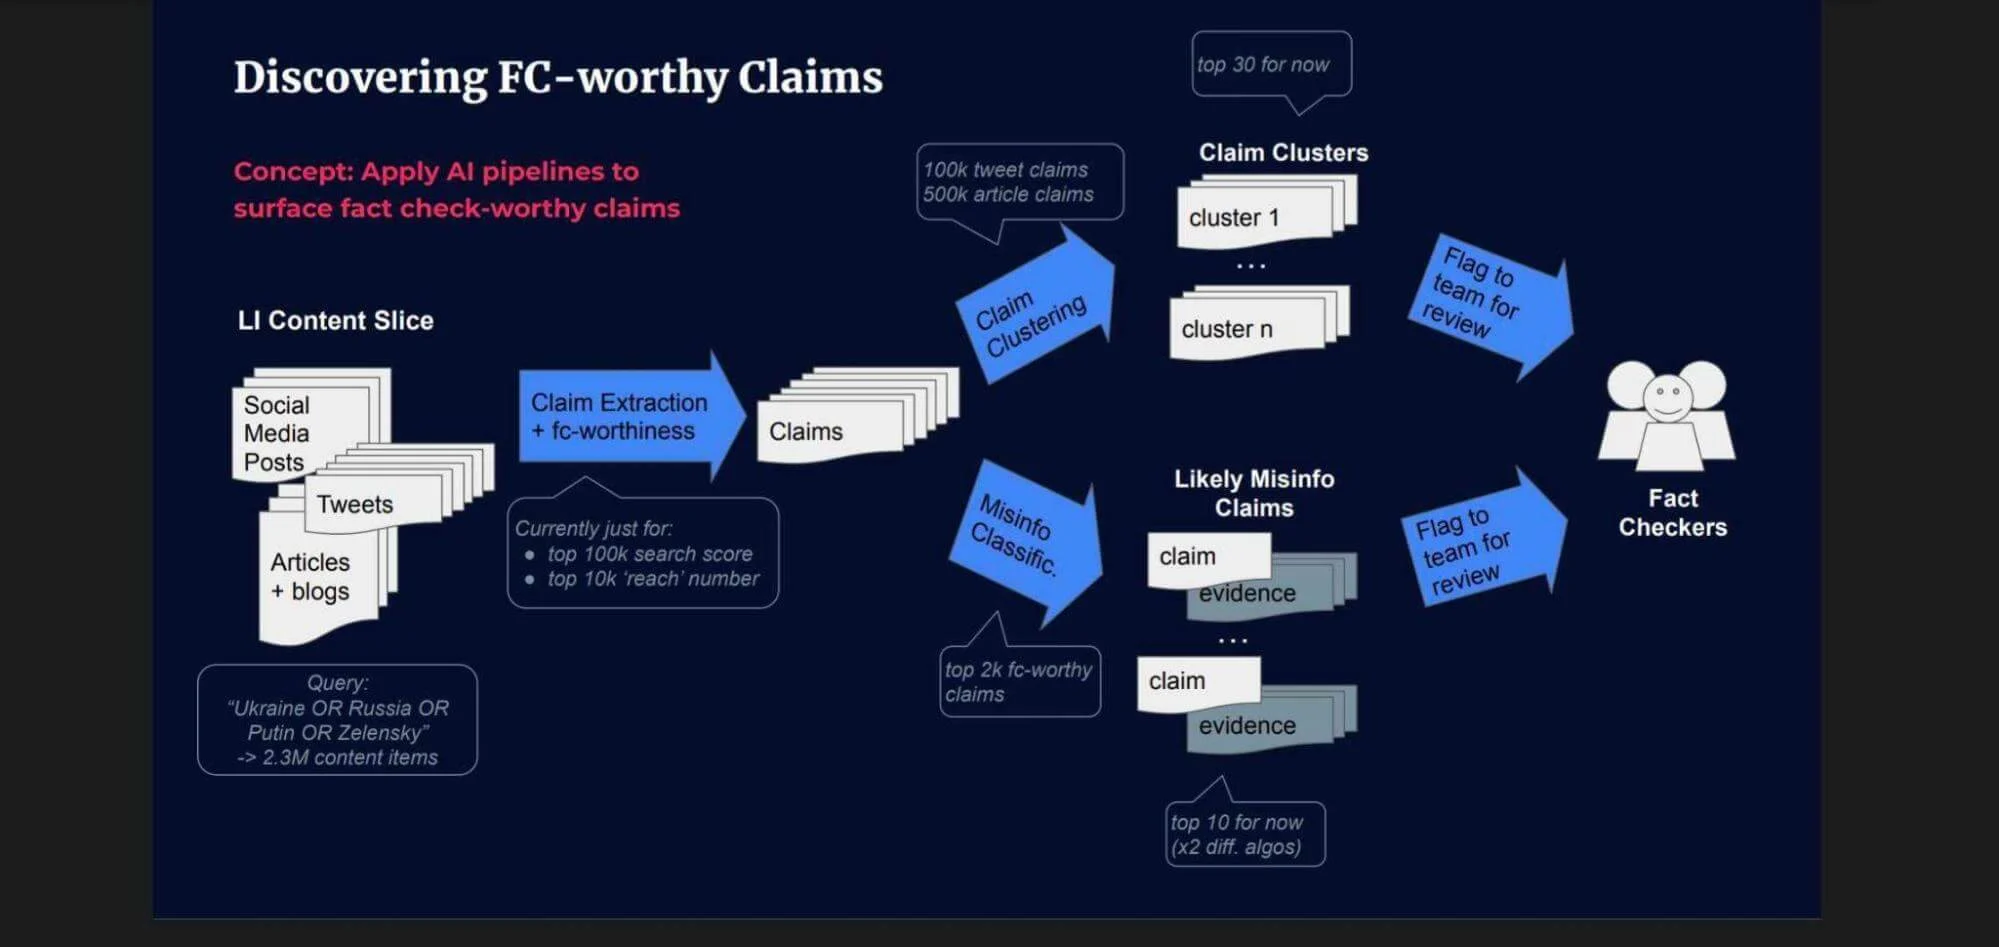 Fact-checking claims